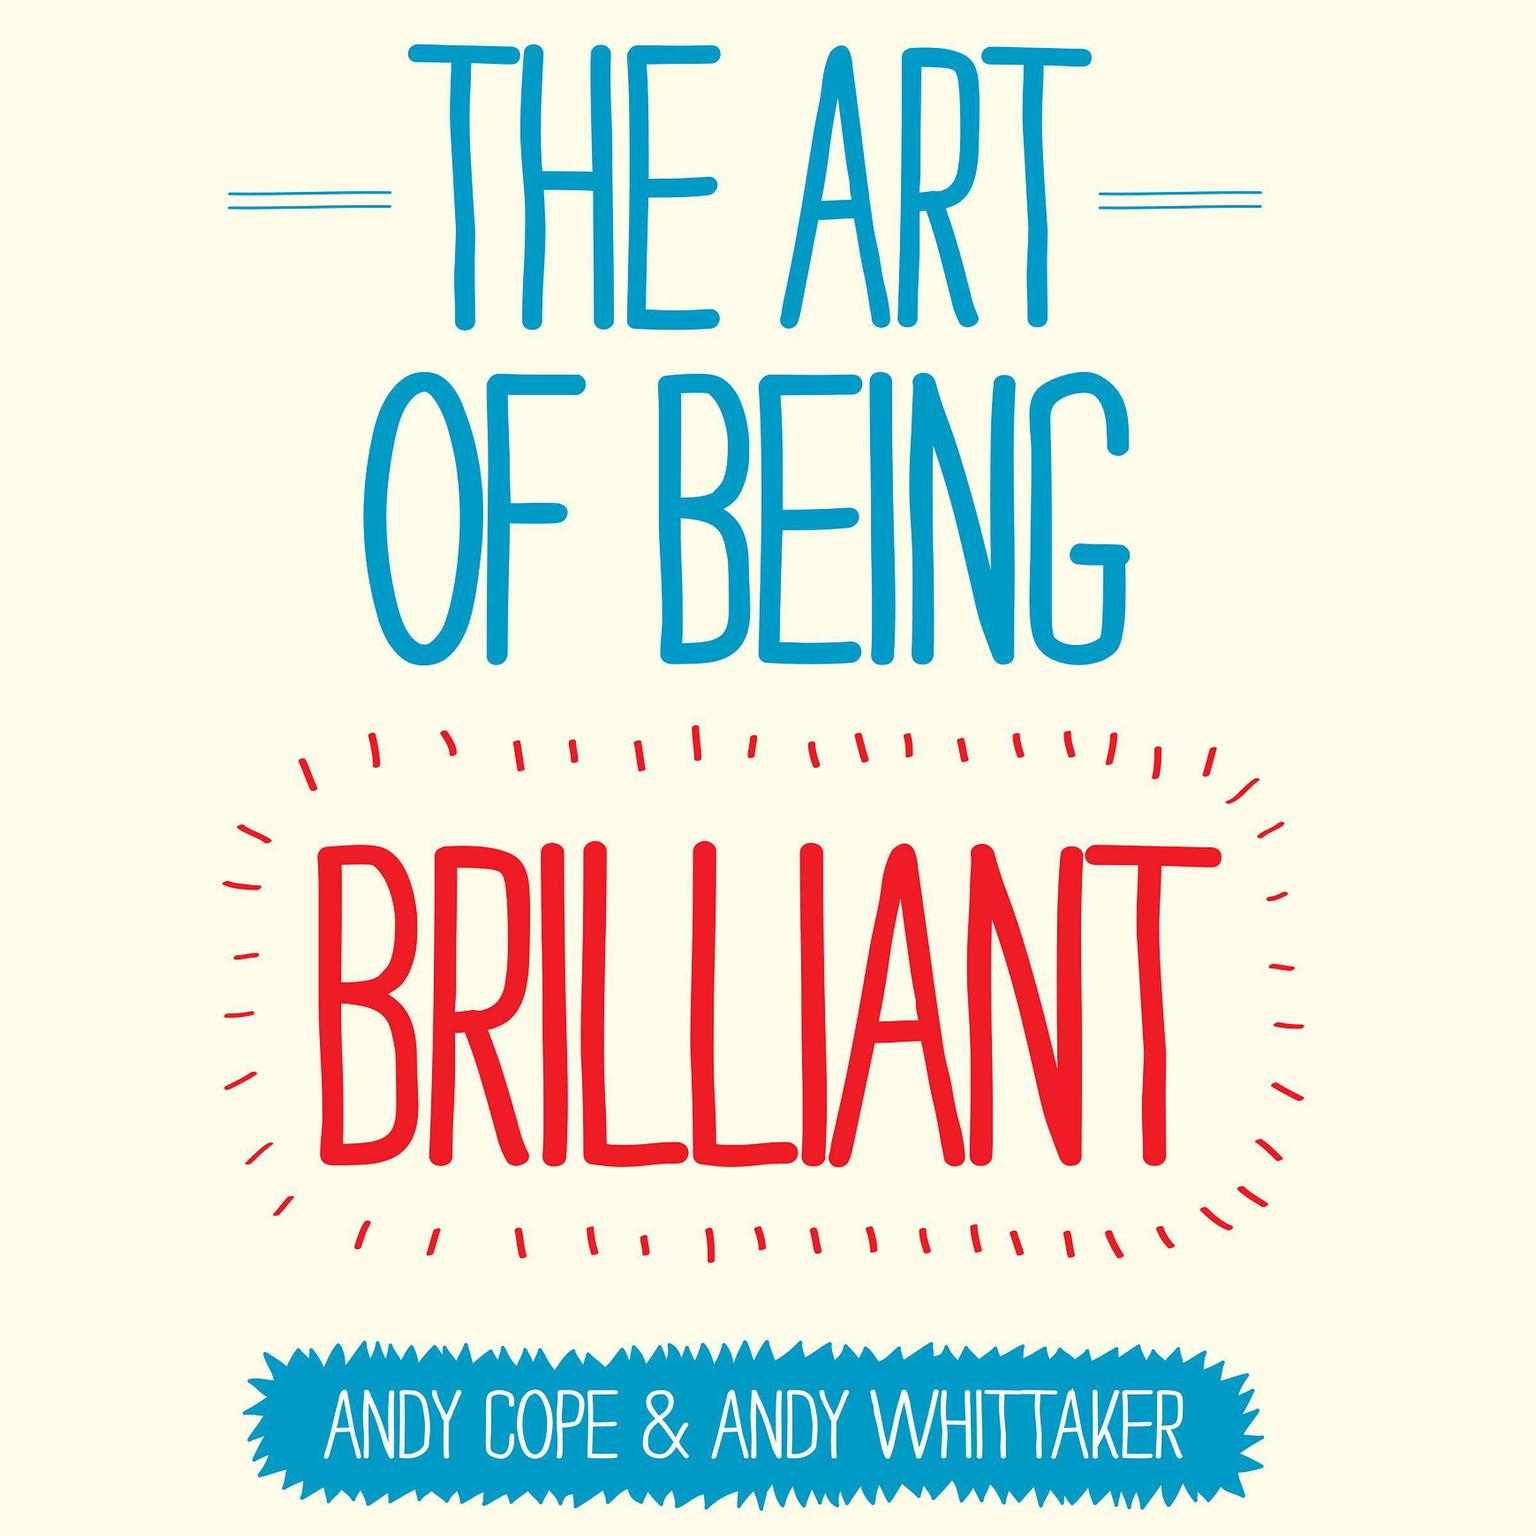 The Art of Being Brilliant: Transform Your Life by Doing What Works For You Audiobook, by Andy Cope